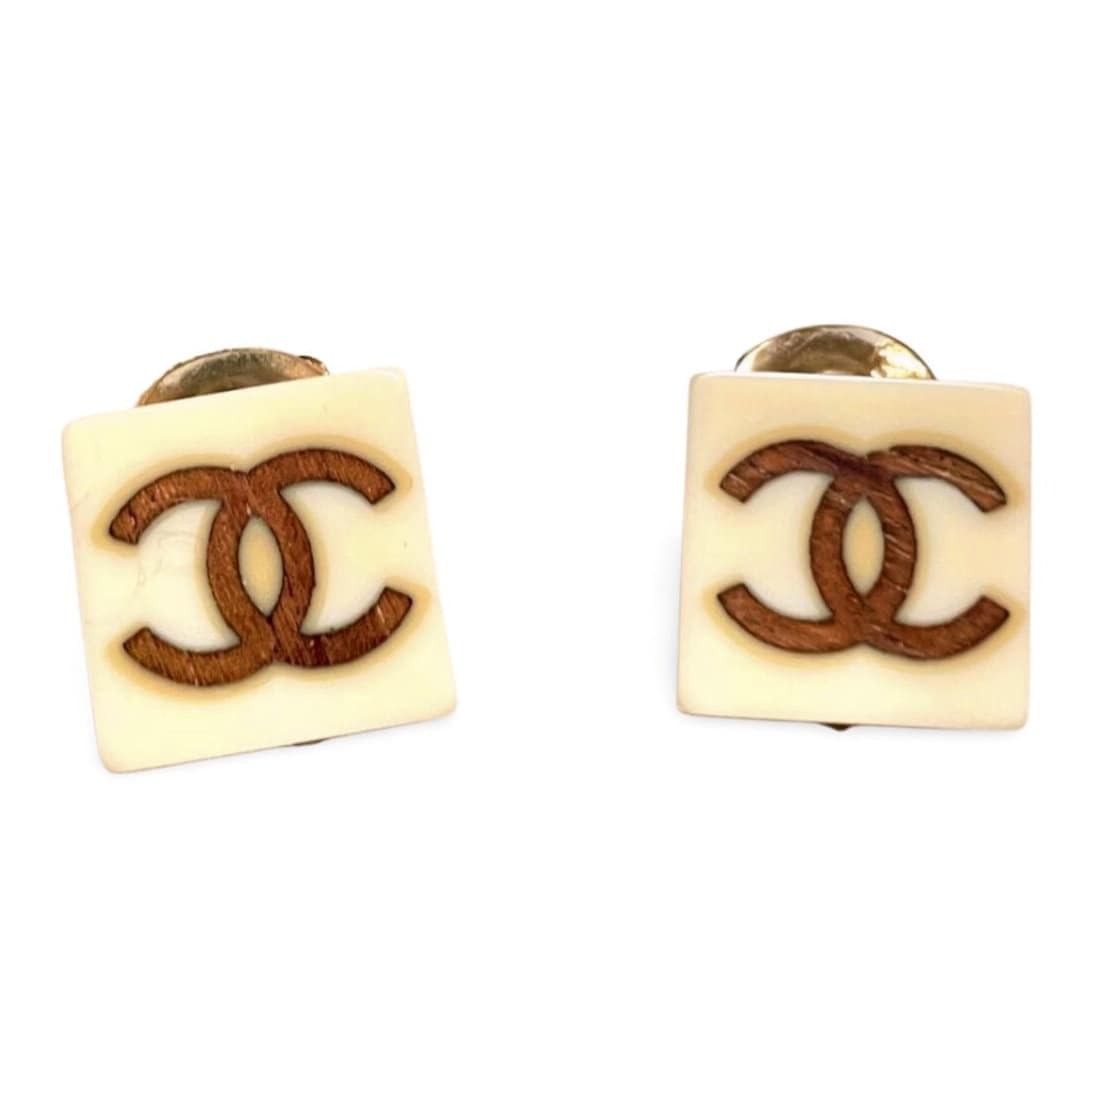 Vintage CHANEL ivory color square earrings with wooden CC mark. Rare must-have jewelry piece. Inlay artwork. Great vintage gift. 060118ya1